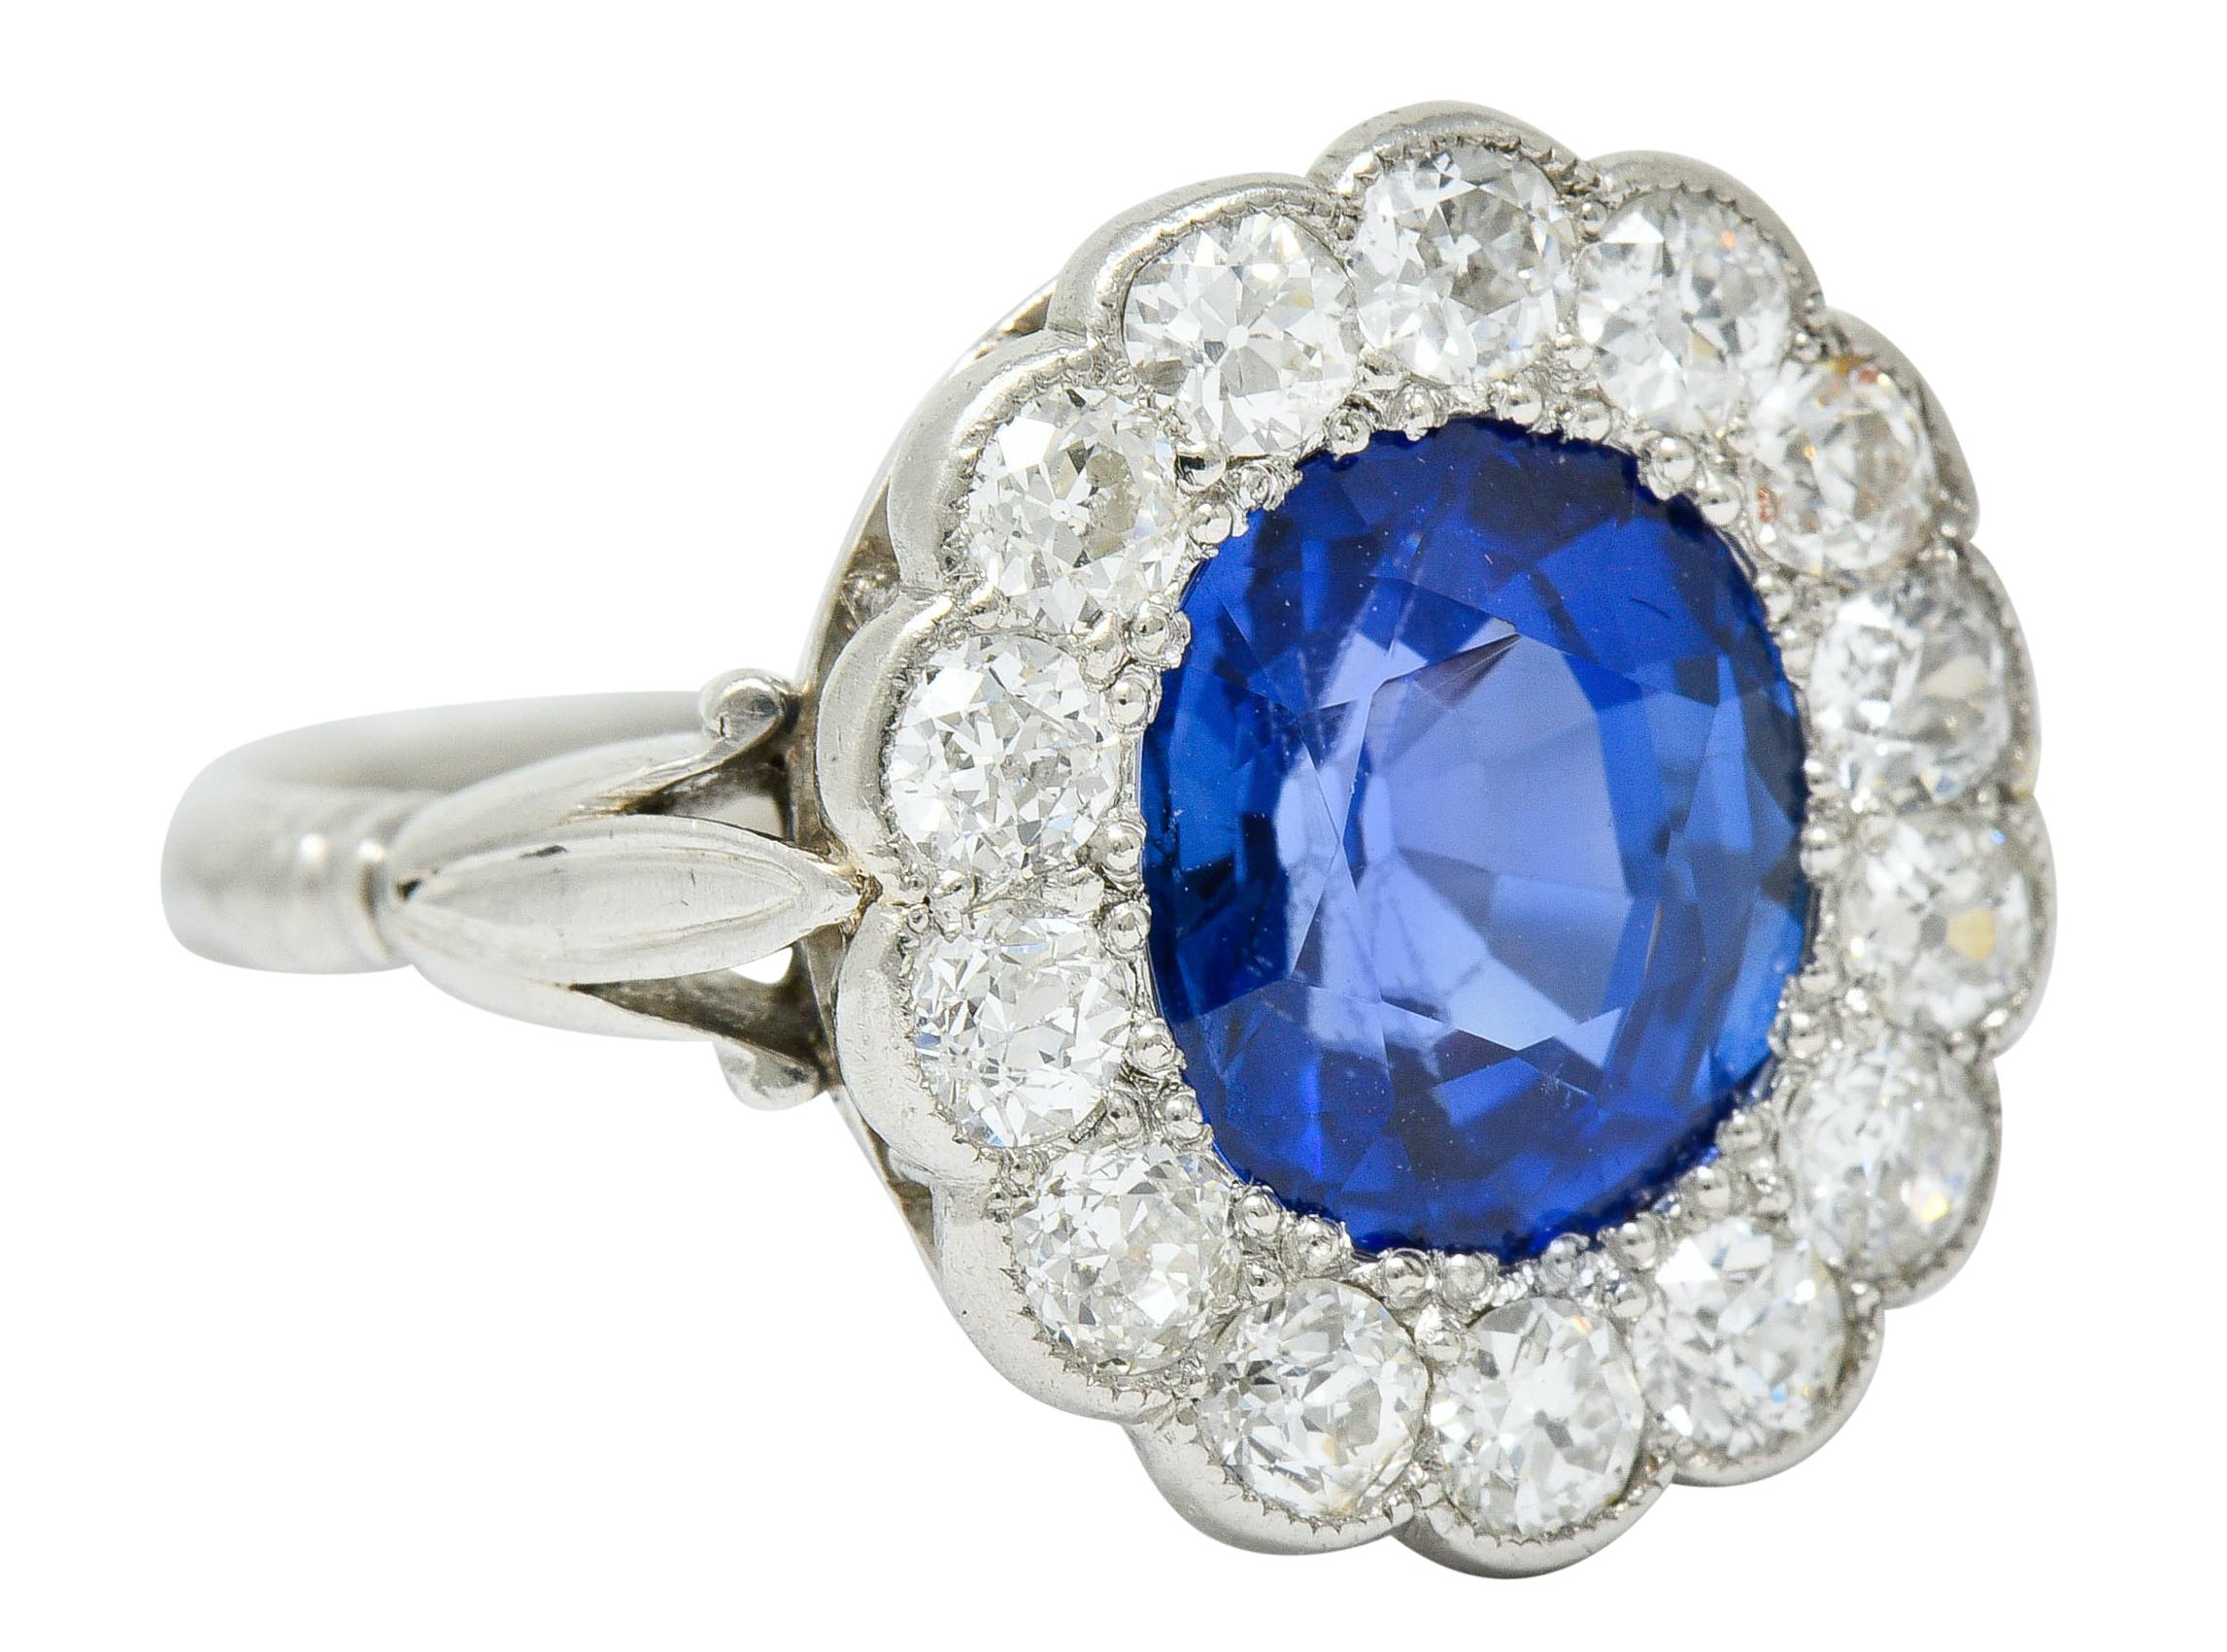 Cluster ring centers an oval cushion cut sapphire weighing 2.55 carats

Transparent with strong blue color

Surrounded by a scalloped halo of old European cut diamonds

Weighing in total approximately 1.00 carat with G to J color and SI